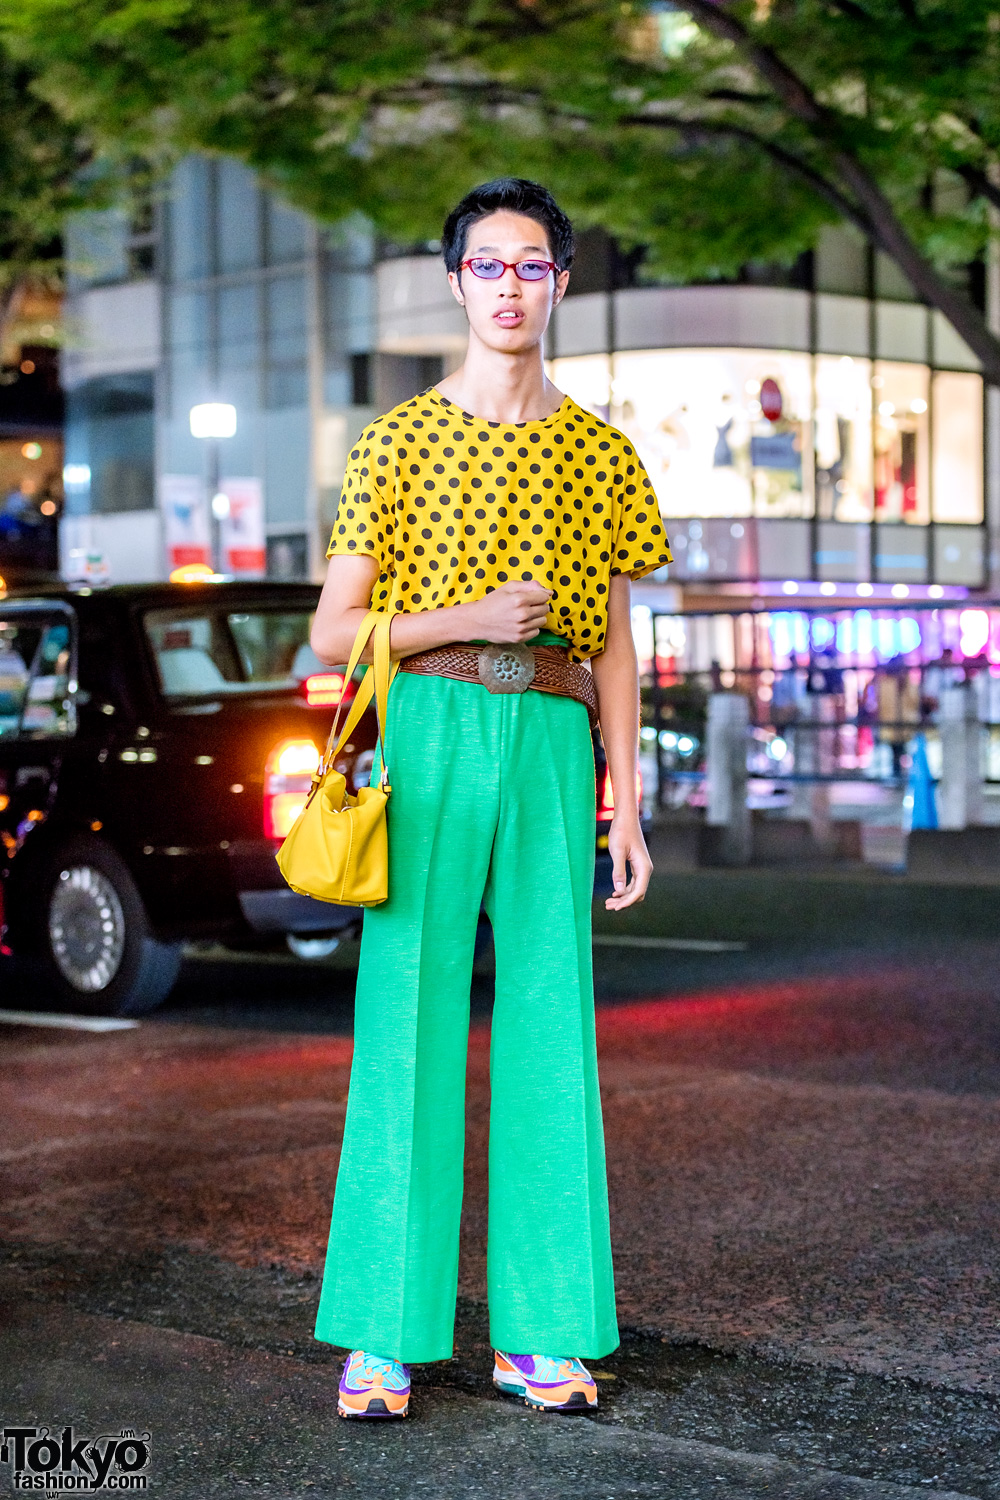 Colorful Retro Japanese Street Style in 